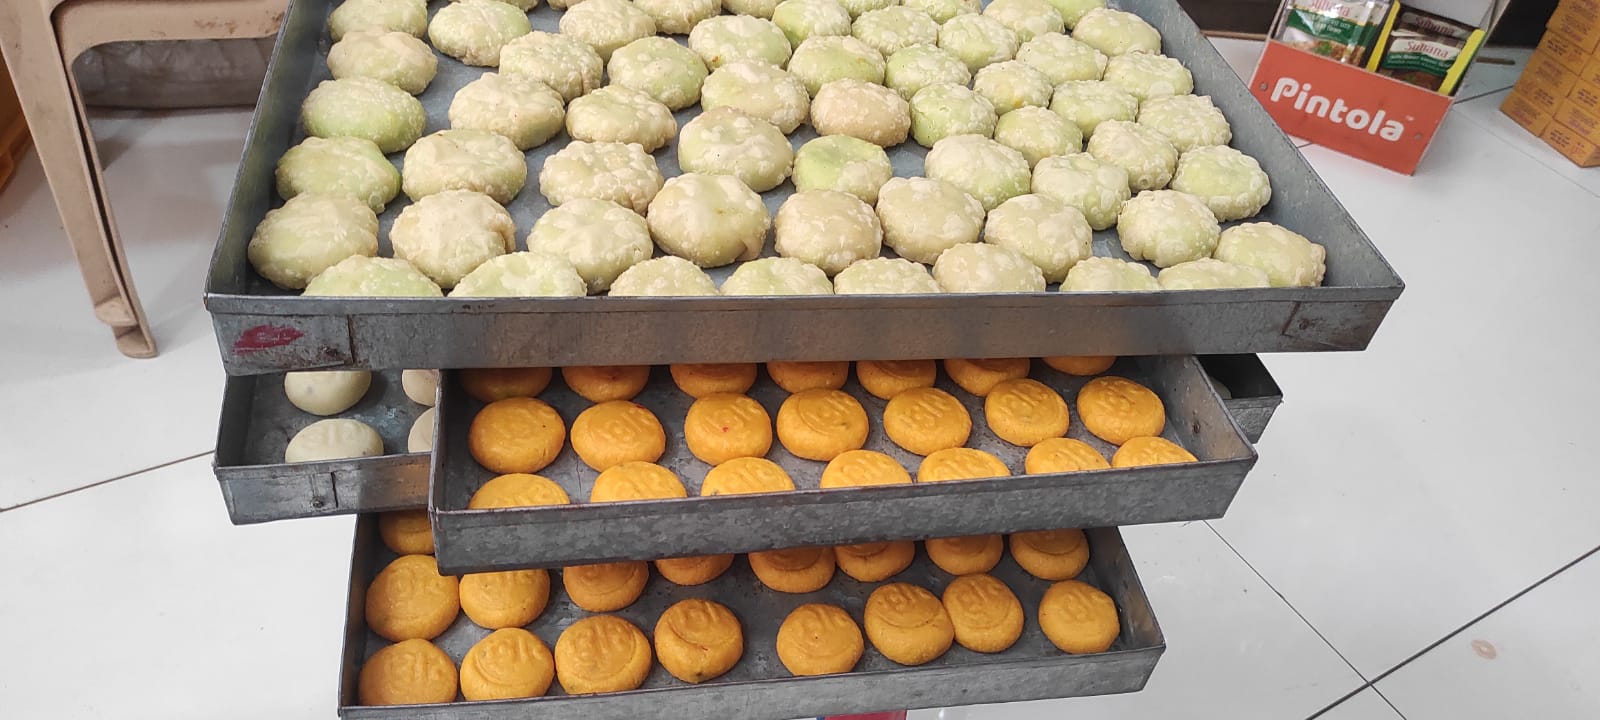 Modak and chappan bhog in various flavors are now available ready-made in Sihore Mithai Bazar